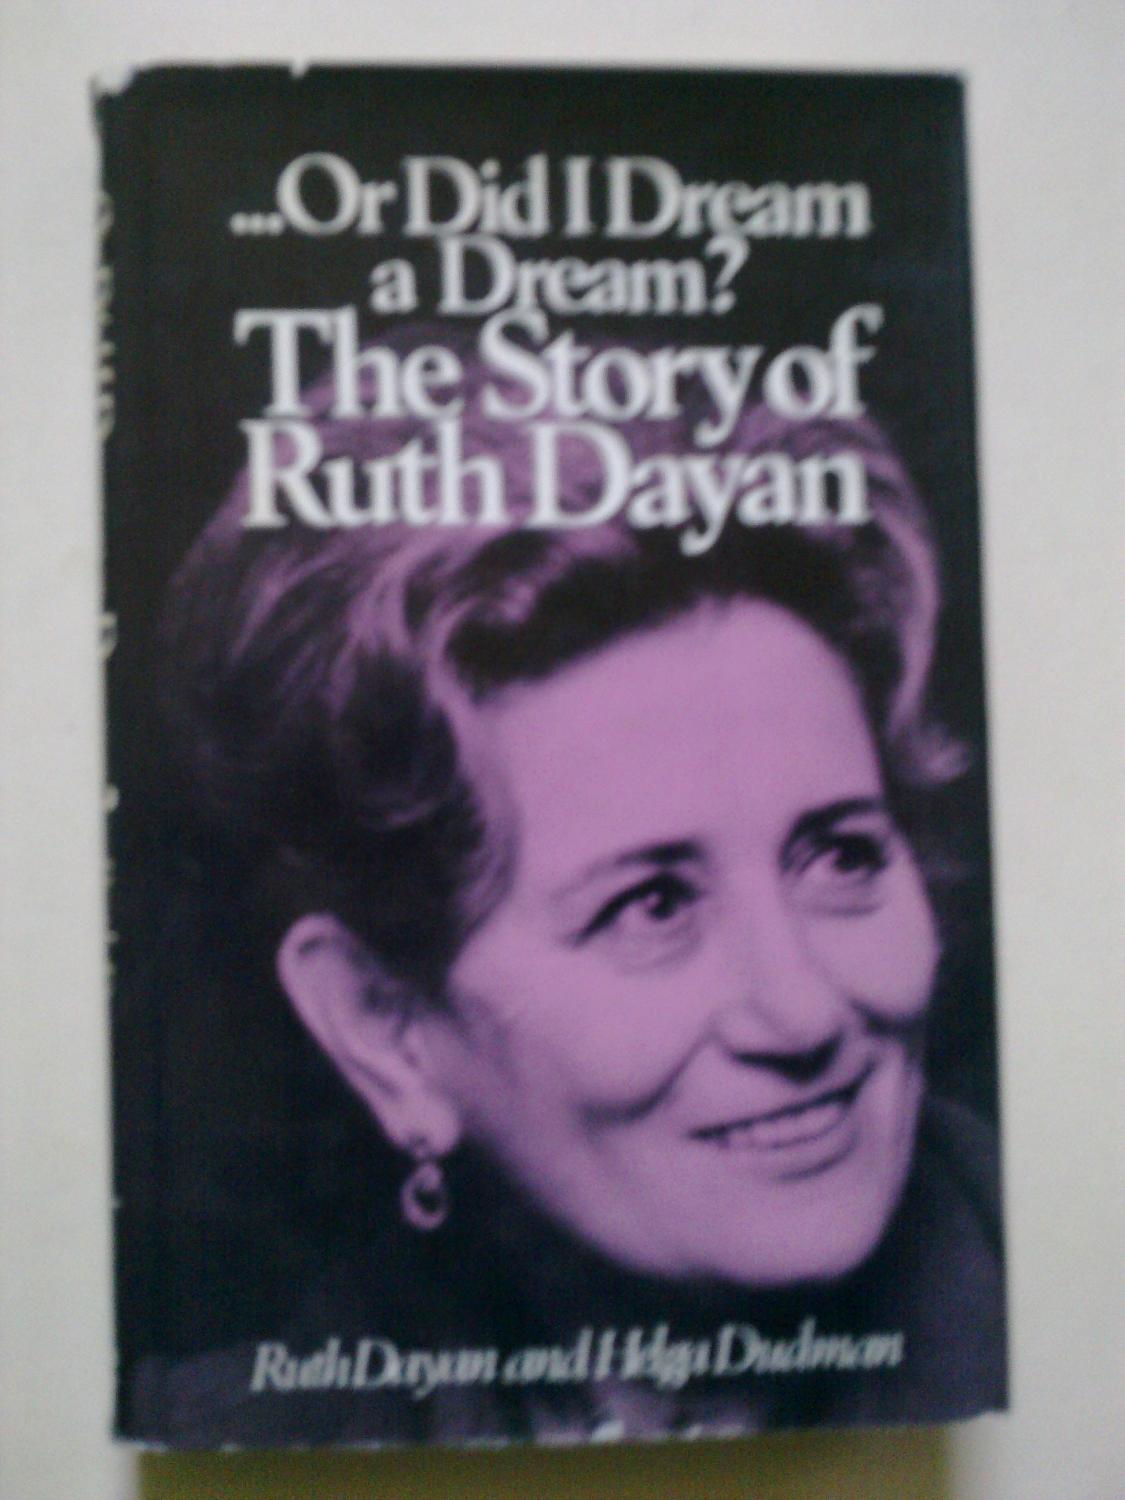 Or Did I Dream a Dream?: Story of Ruth Dayan